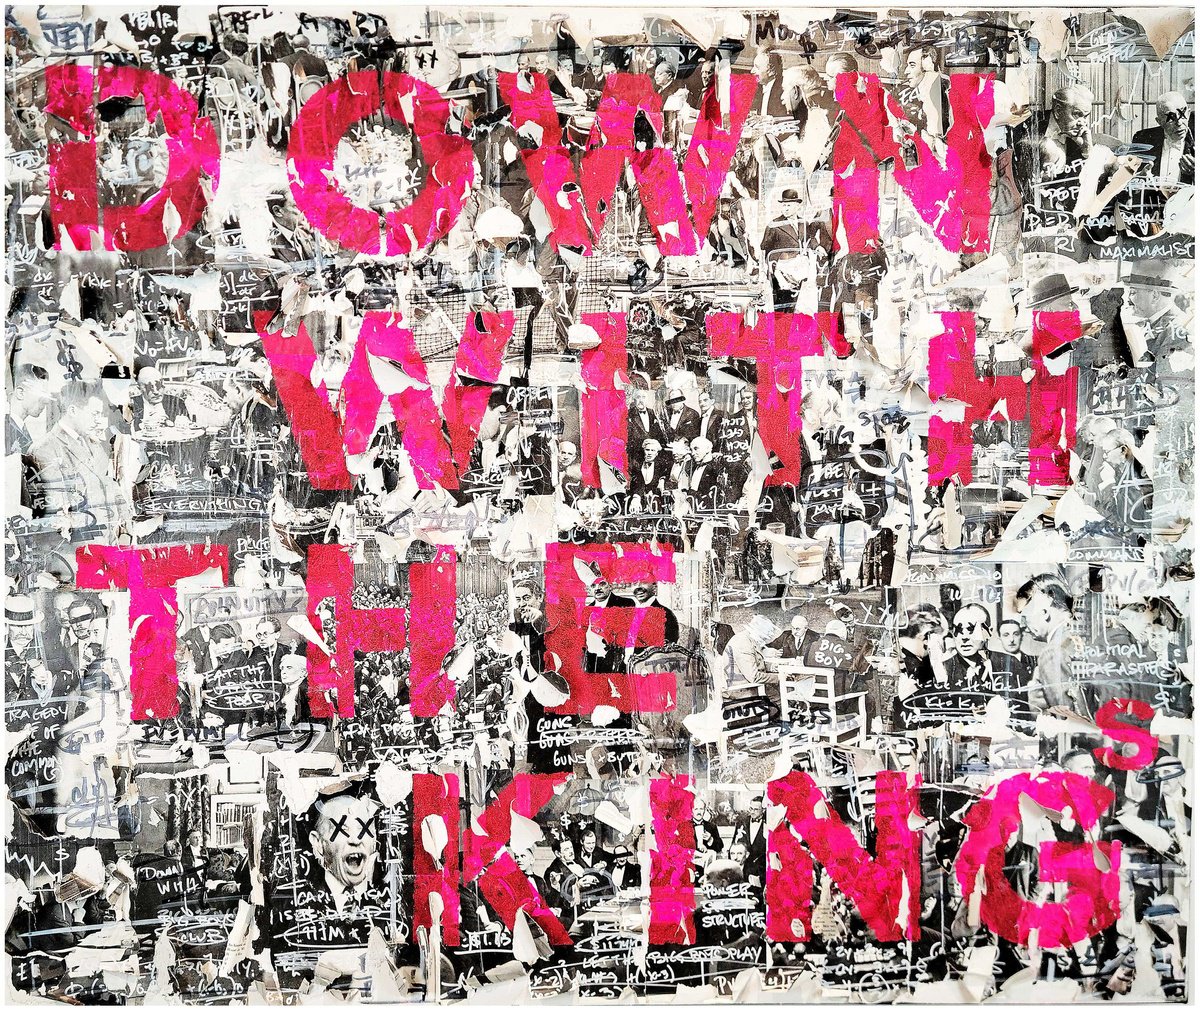 DOWN WITH THE KING(S) by Patrick Skals